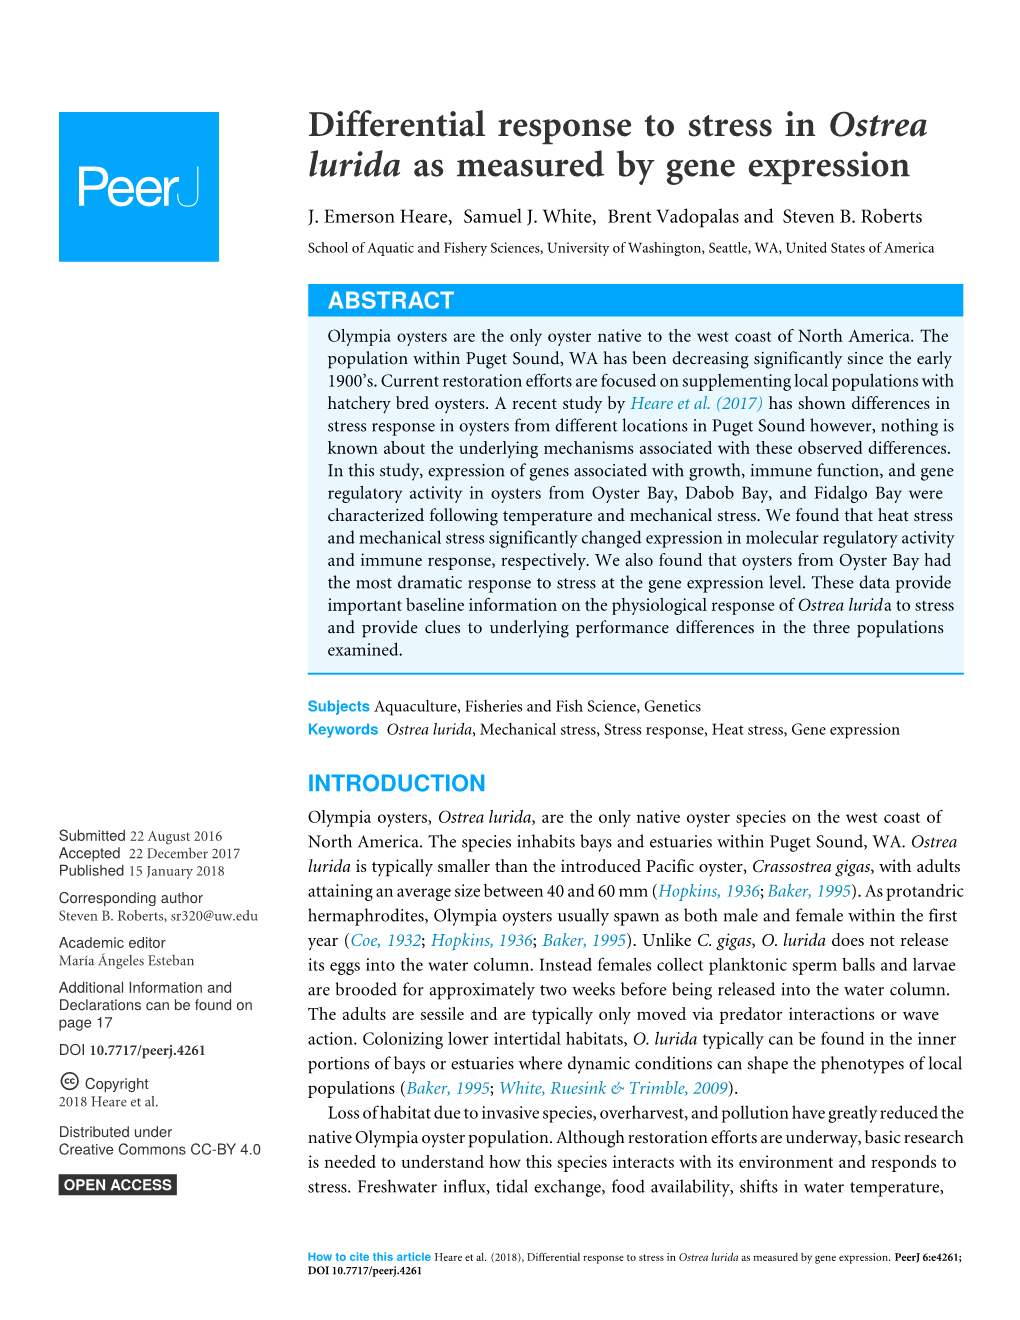 Differential Response to Stress in Ostrea Lurida As Measured by Gene Expression